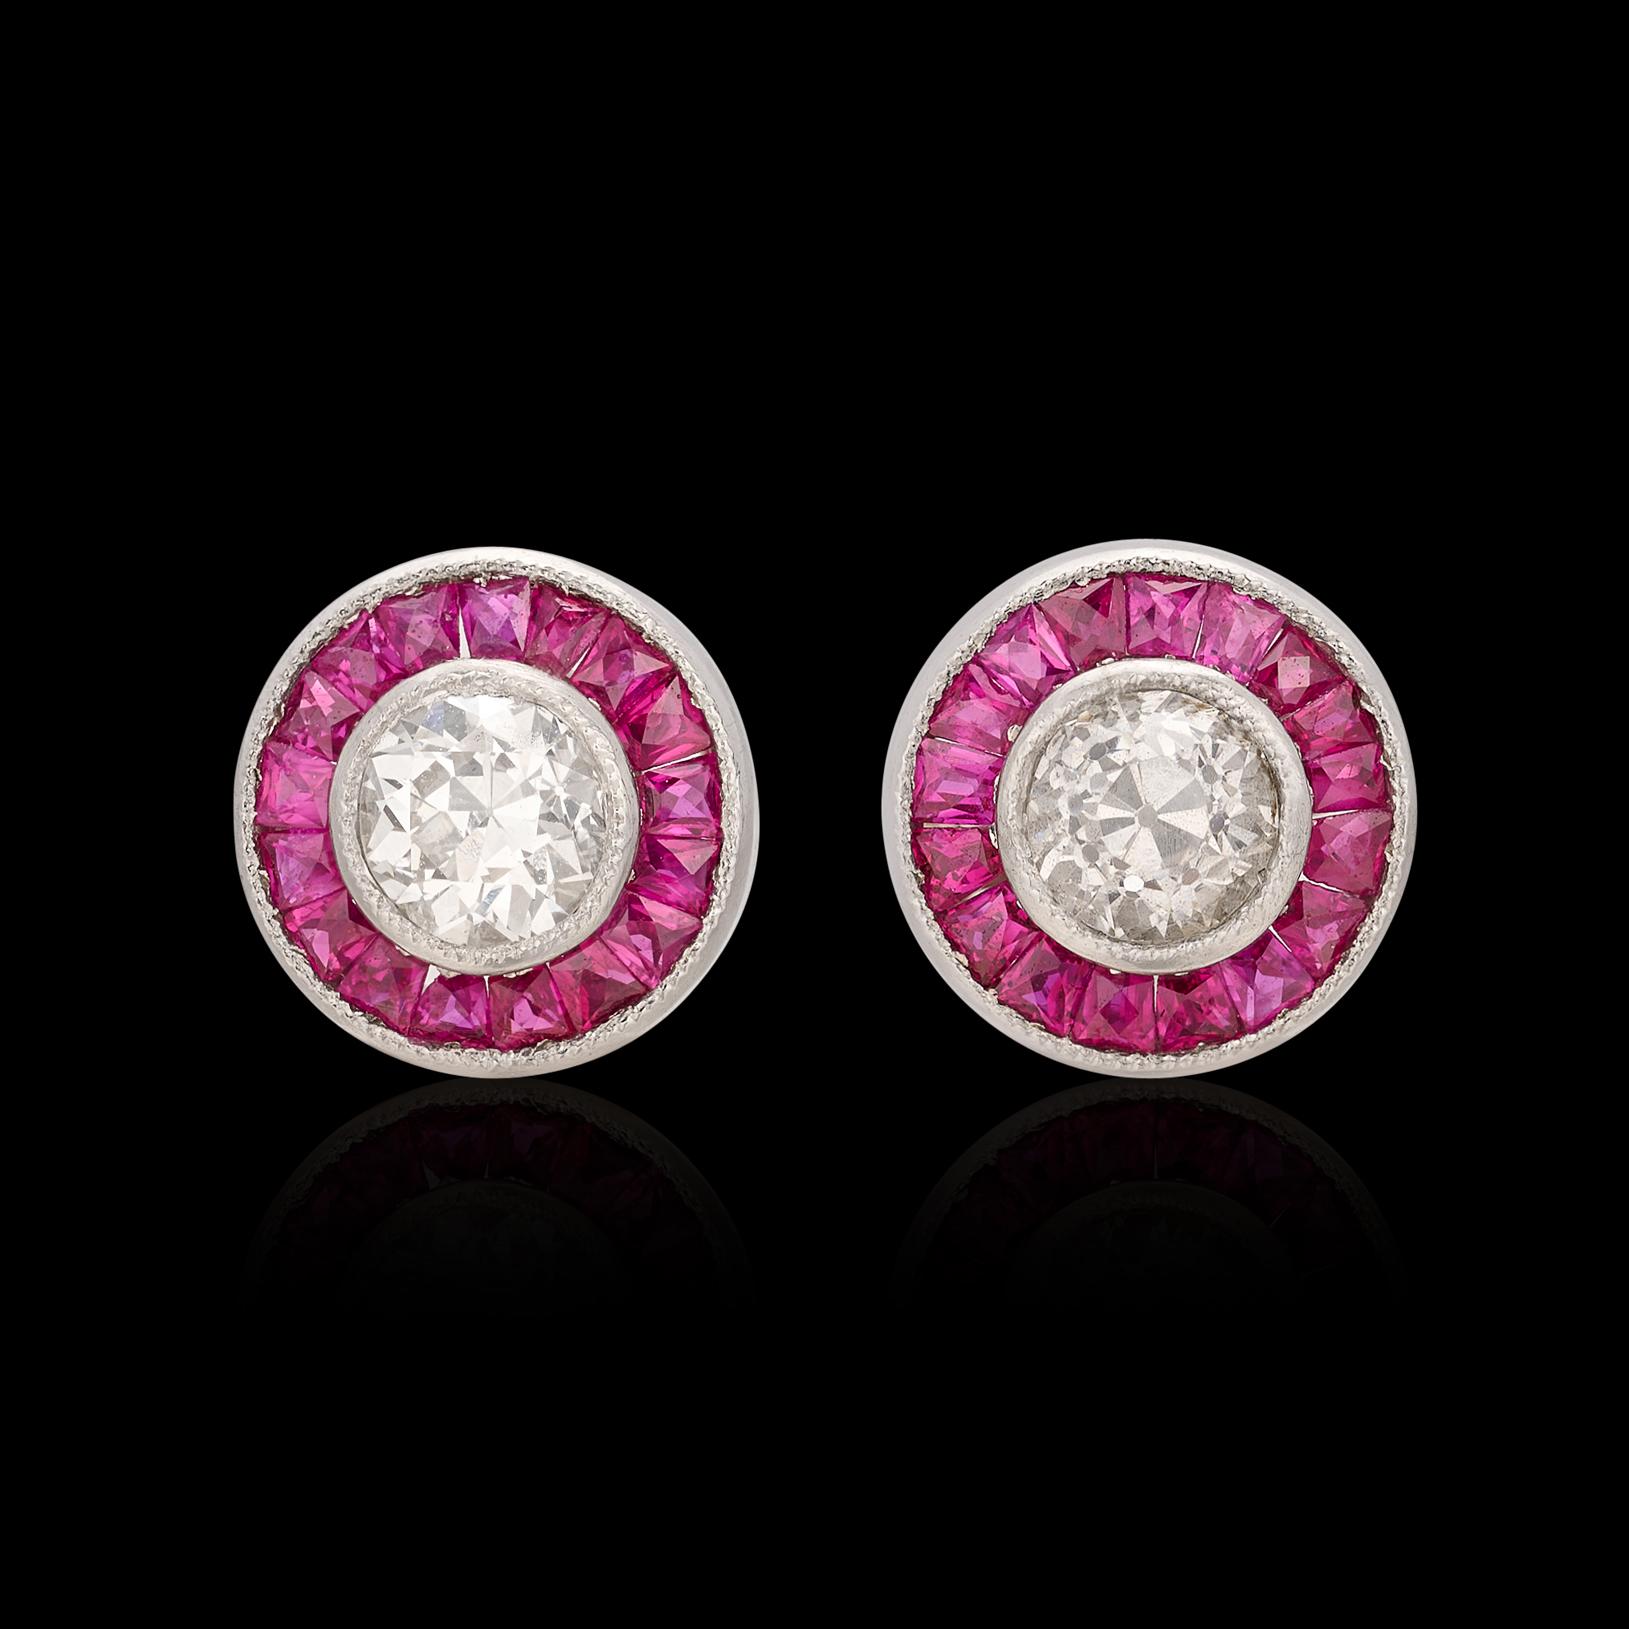 The perfect pair of diamond stud earrings surrounded by just the right amount of color. The platinum earrings feature two old euro diamonds (averaging I/SI1) for 0.30 carats, encircled by a halo of fine red rubies. The diamond stud earrings deliver